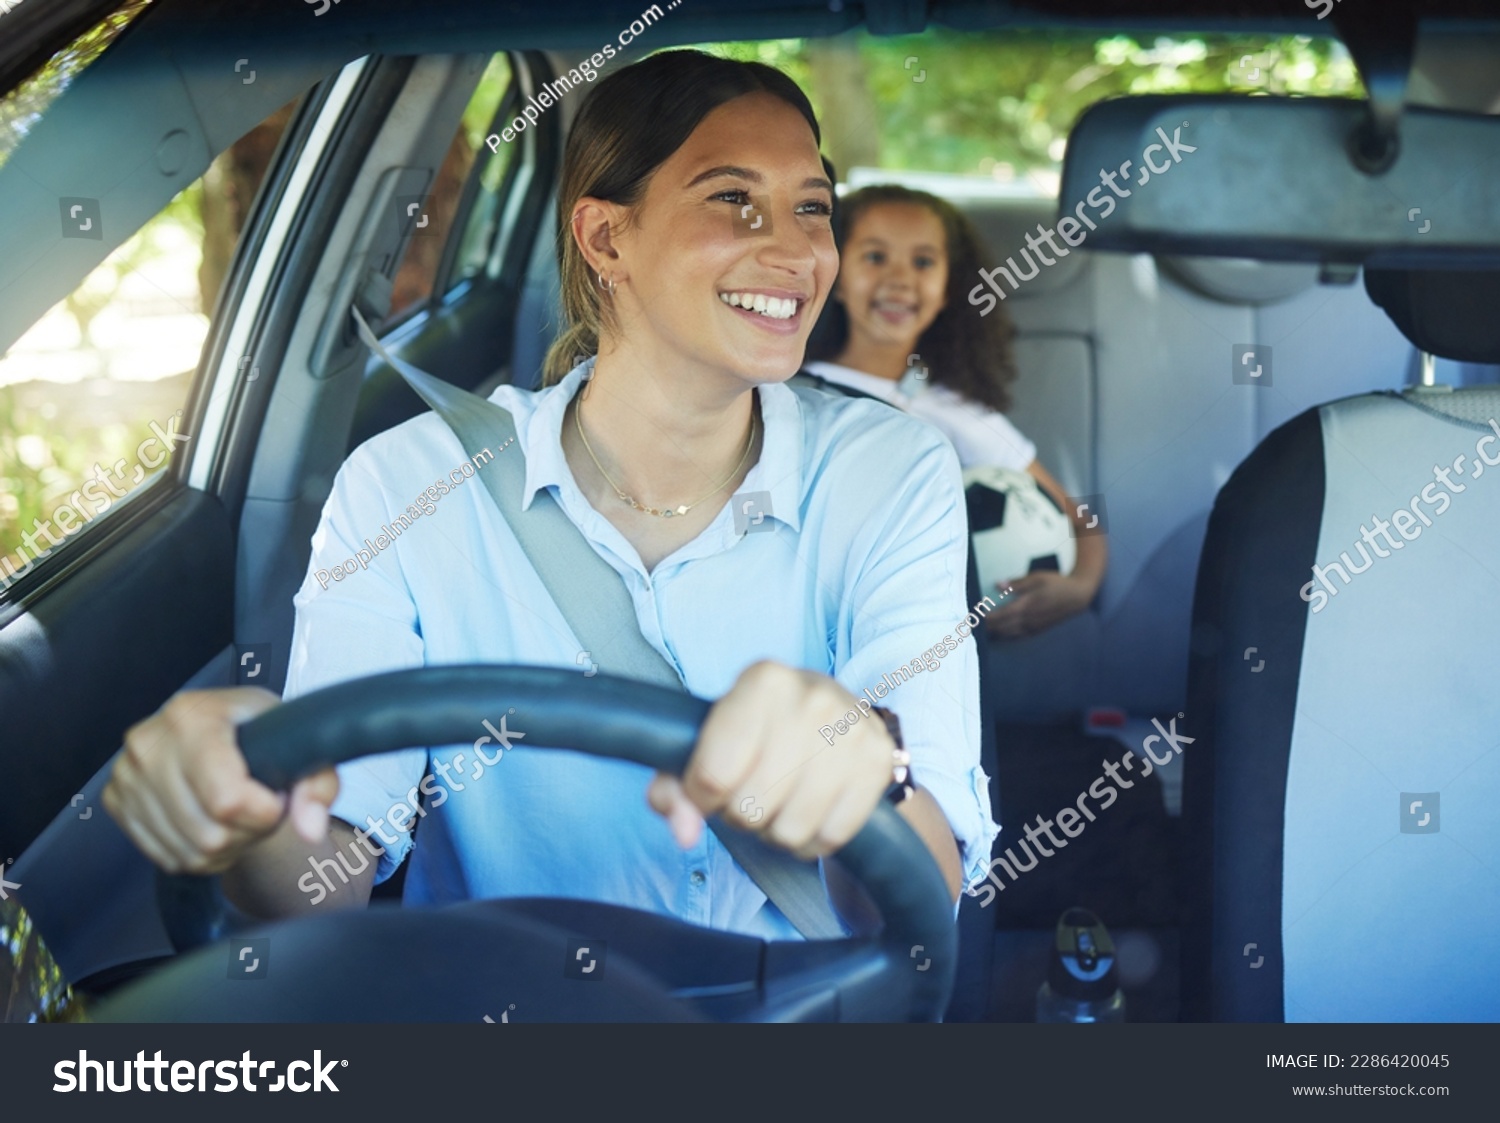 Travel, mother and child in car for drive, fun and sports, soccer and adventure, happy and excited. Mom, driver and girl passenger in vehicle, smile and bonding on road trip to football activity #2286420045